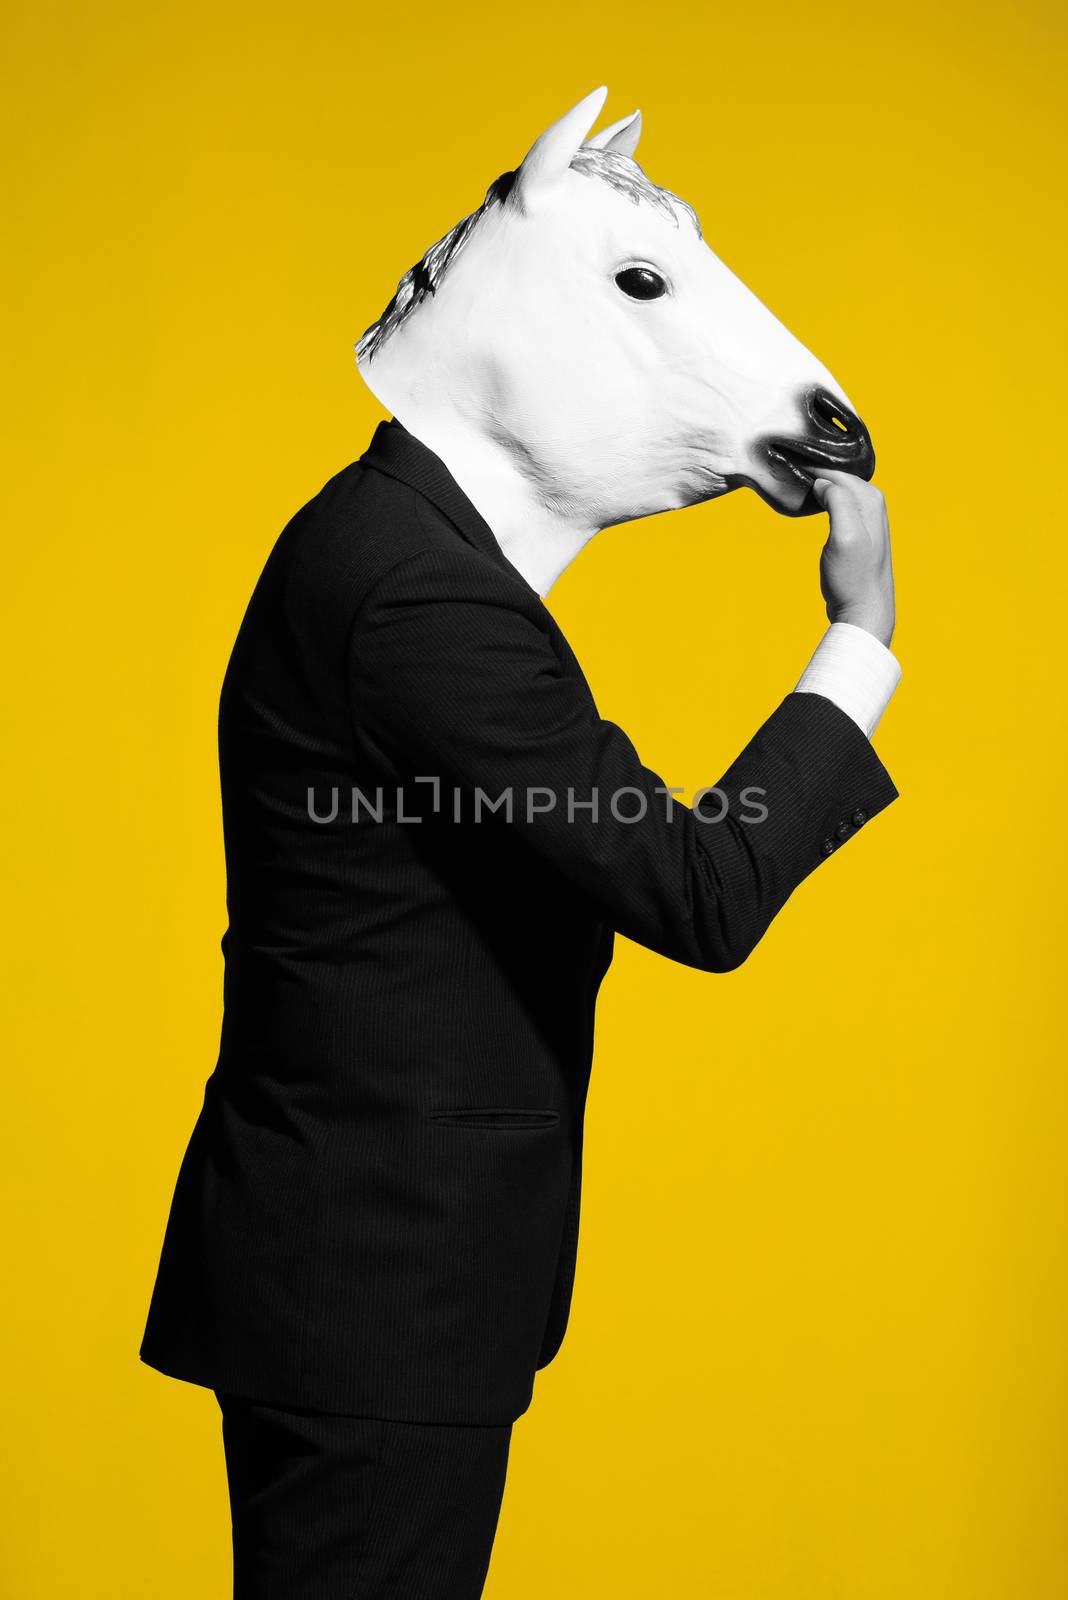 A man in a suit and a horse mask bites own hand. Conceptual business background